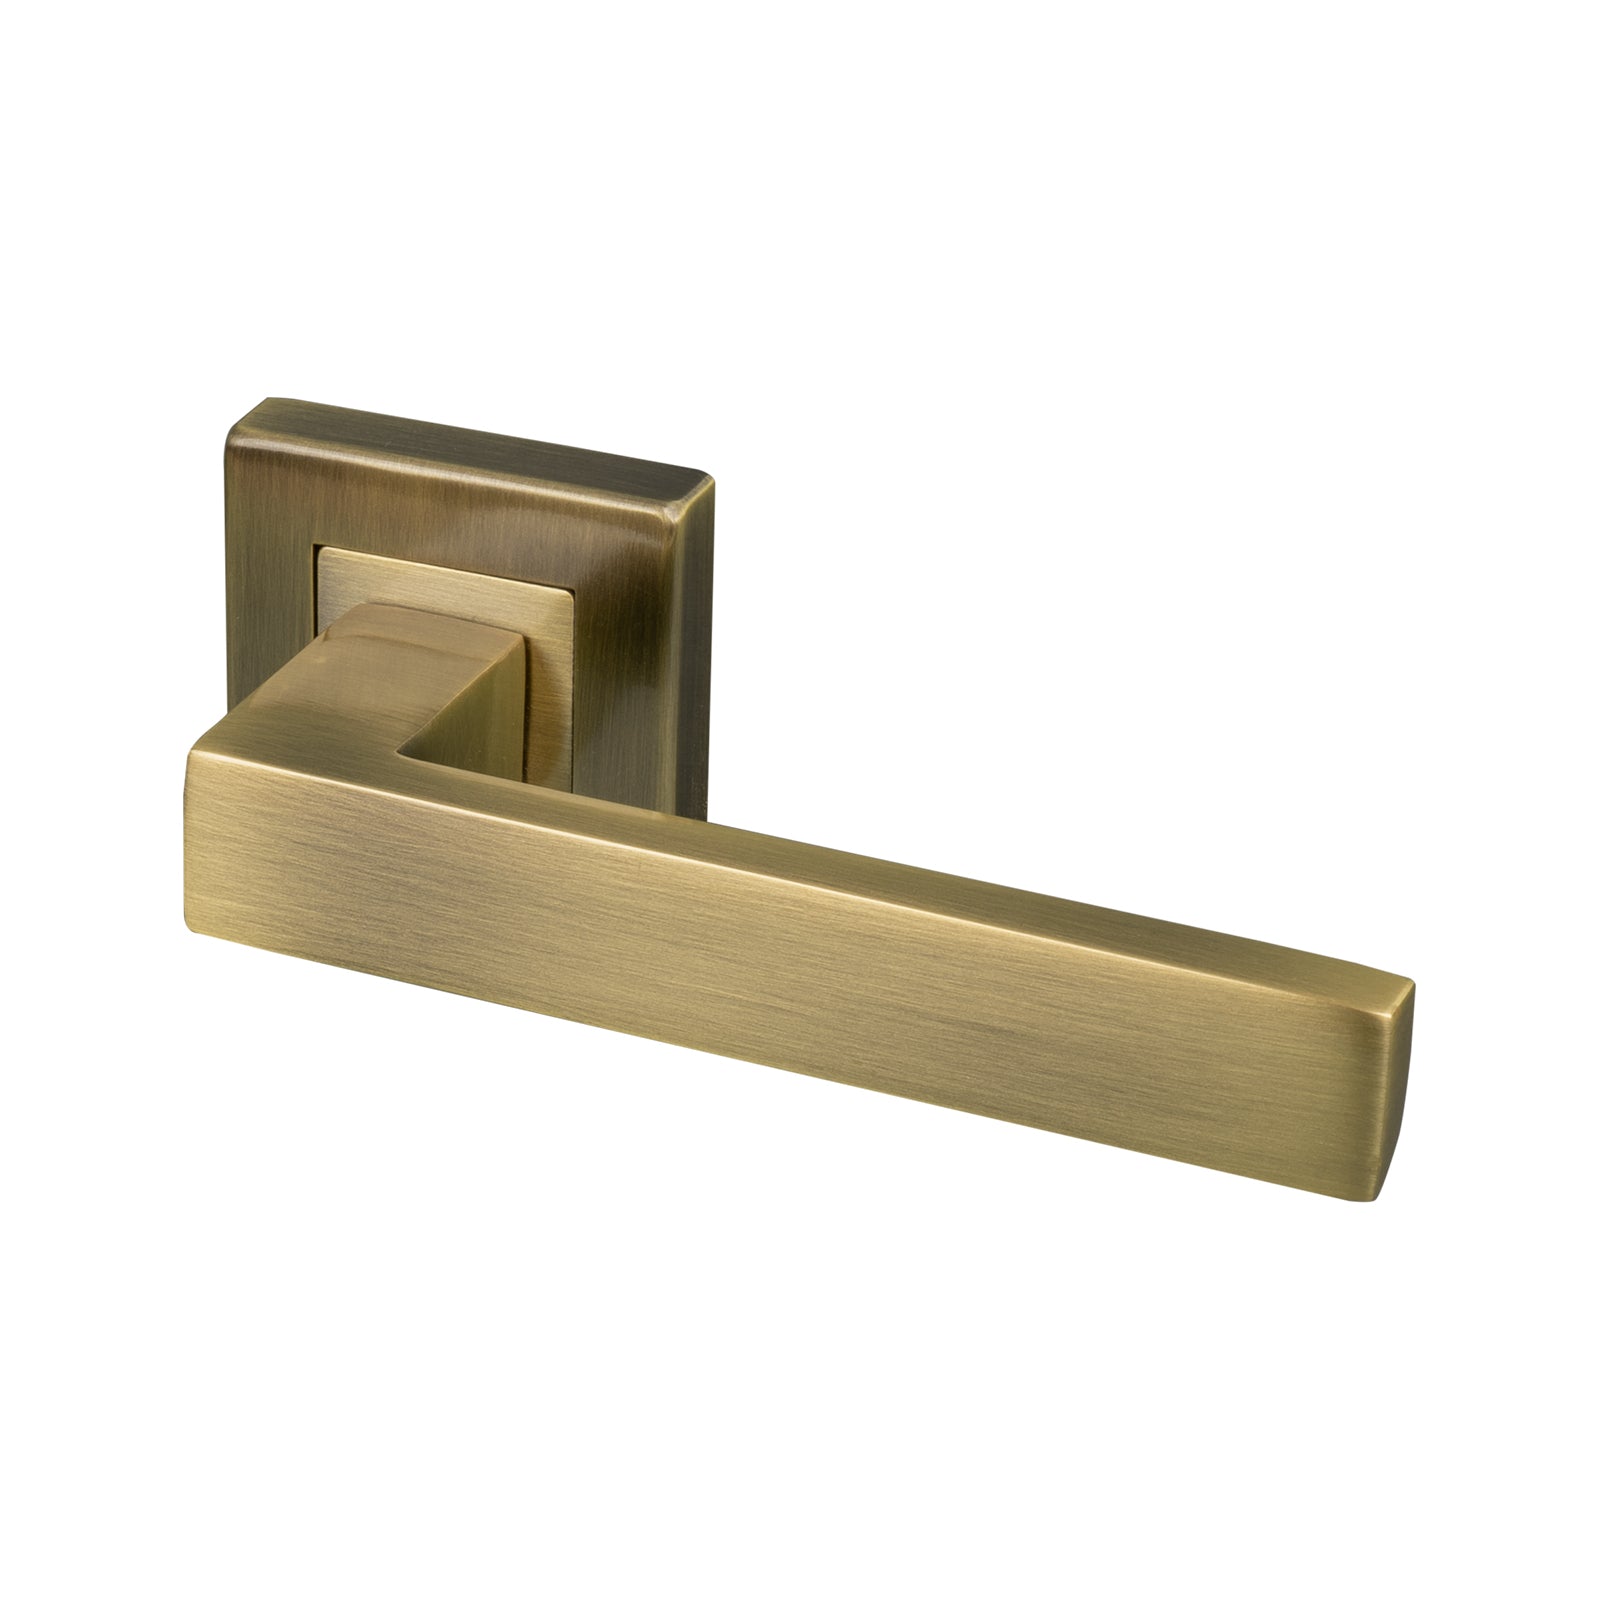 aged brass square rose door handles, modern lever on rose SHOW